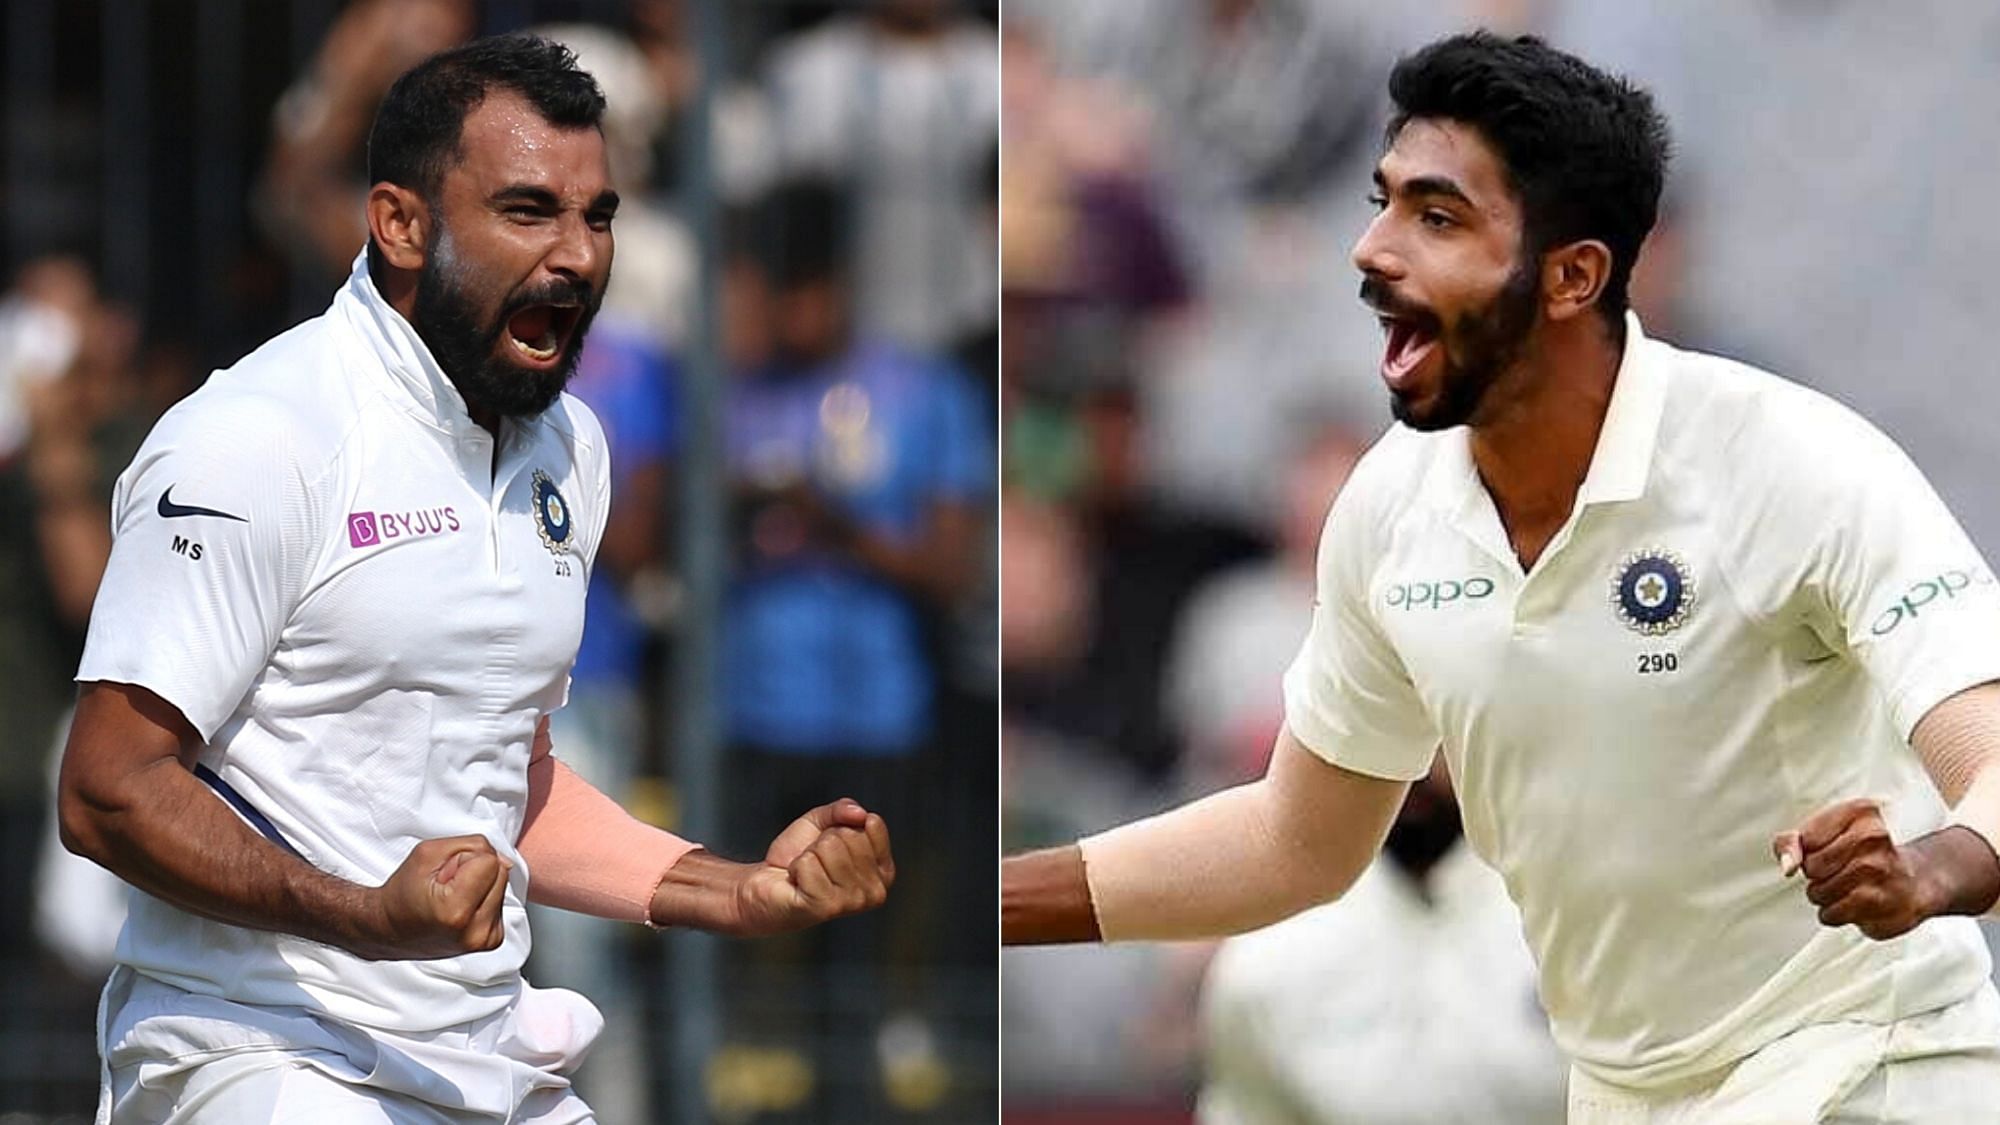 Glenn Turner expects Bumrah and Mohammed Shami to lift their game in the upcoming two-Test series, which begins on 21 February.